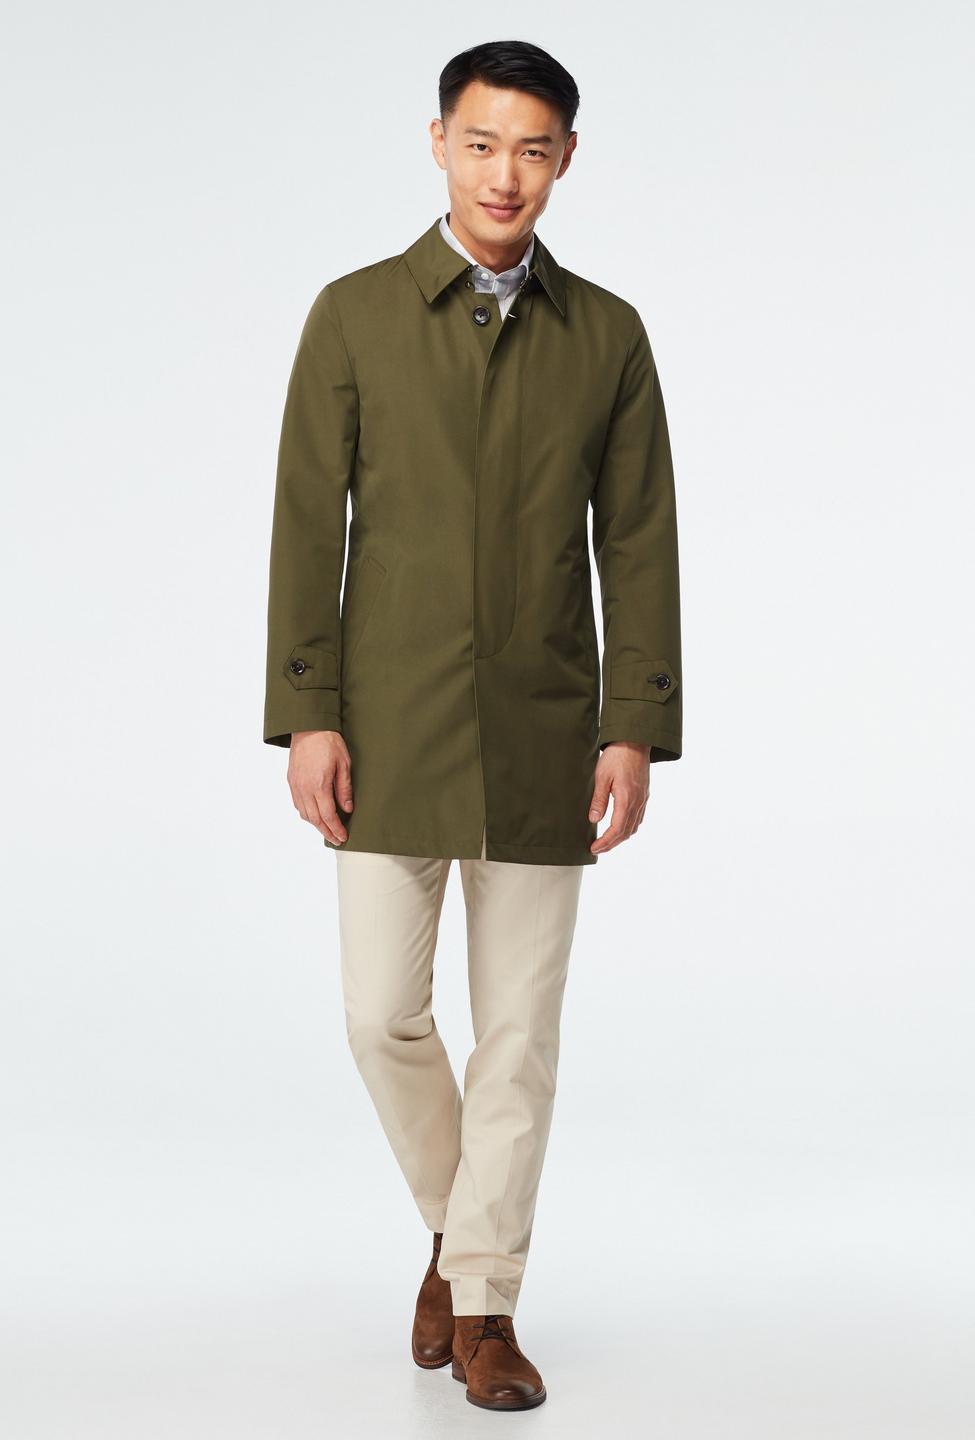 Green trenchcoat - Solid Design from Indochino Collection